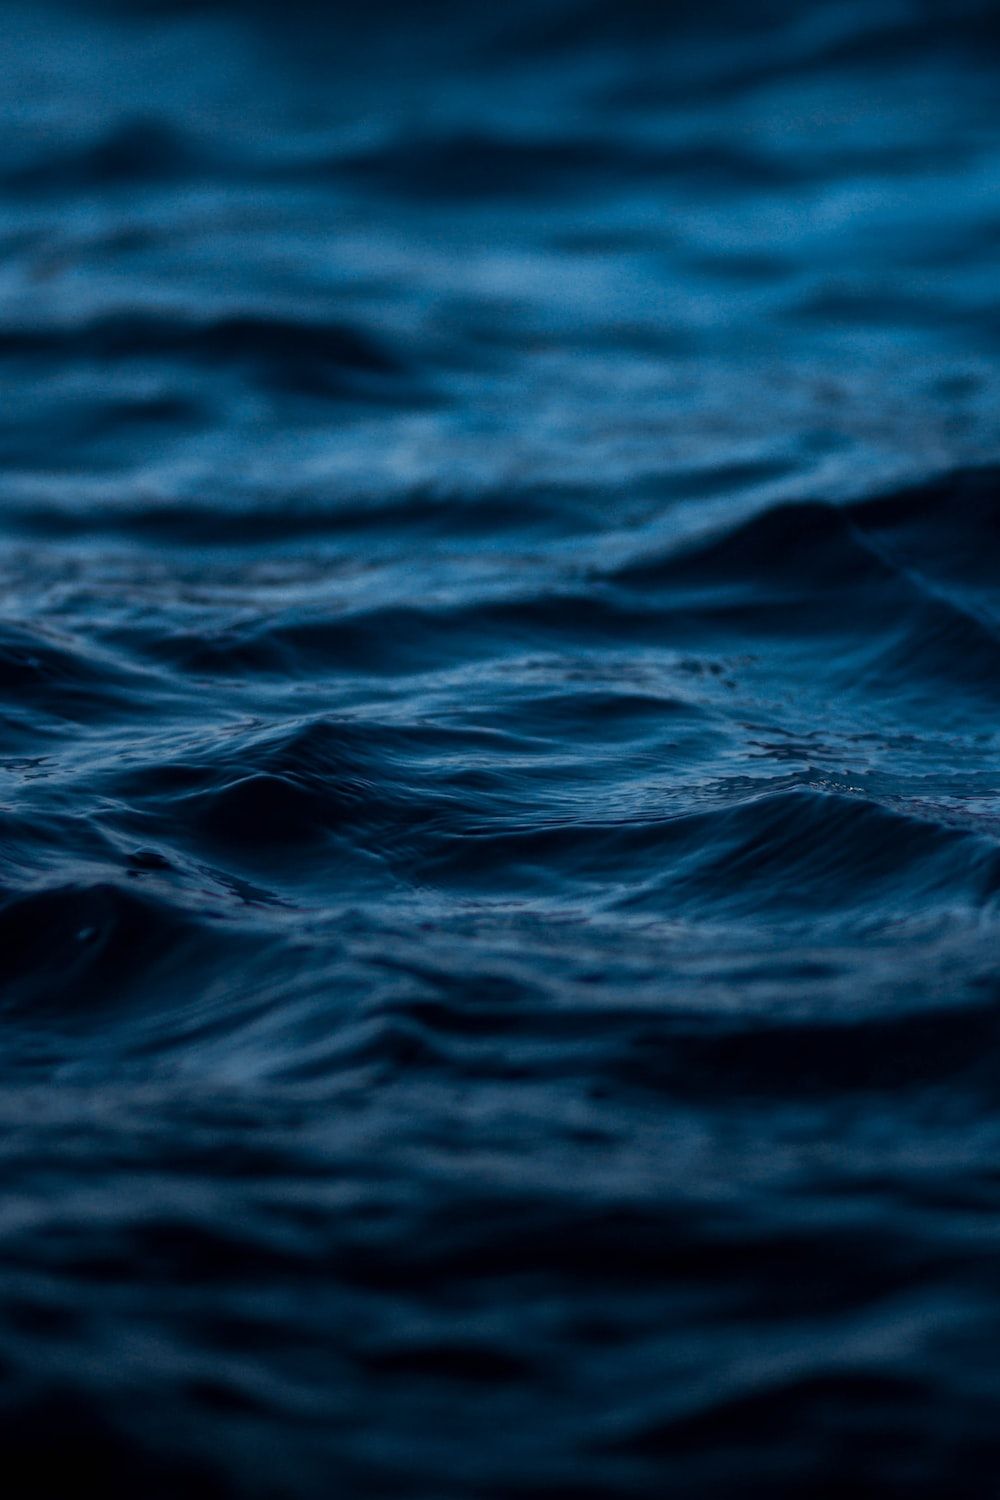 A close up of the ocean with a blue hue - Water